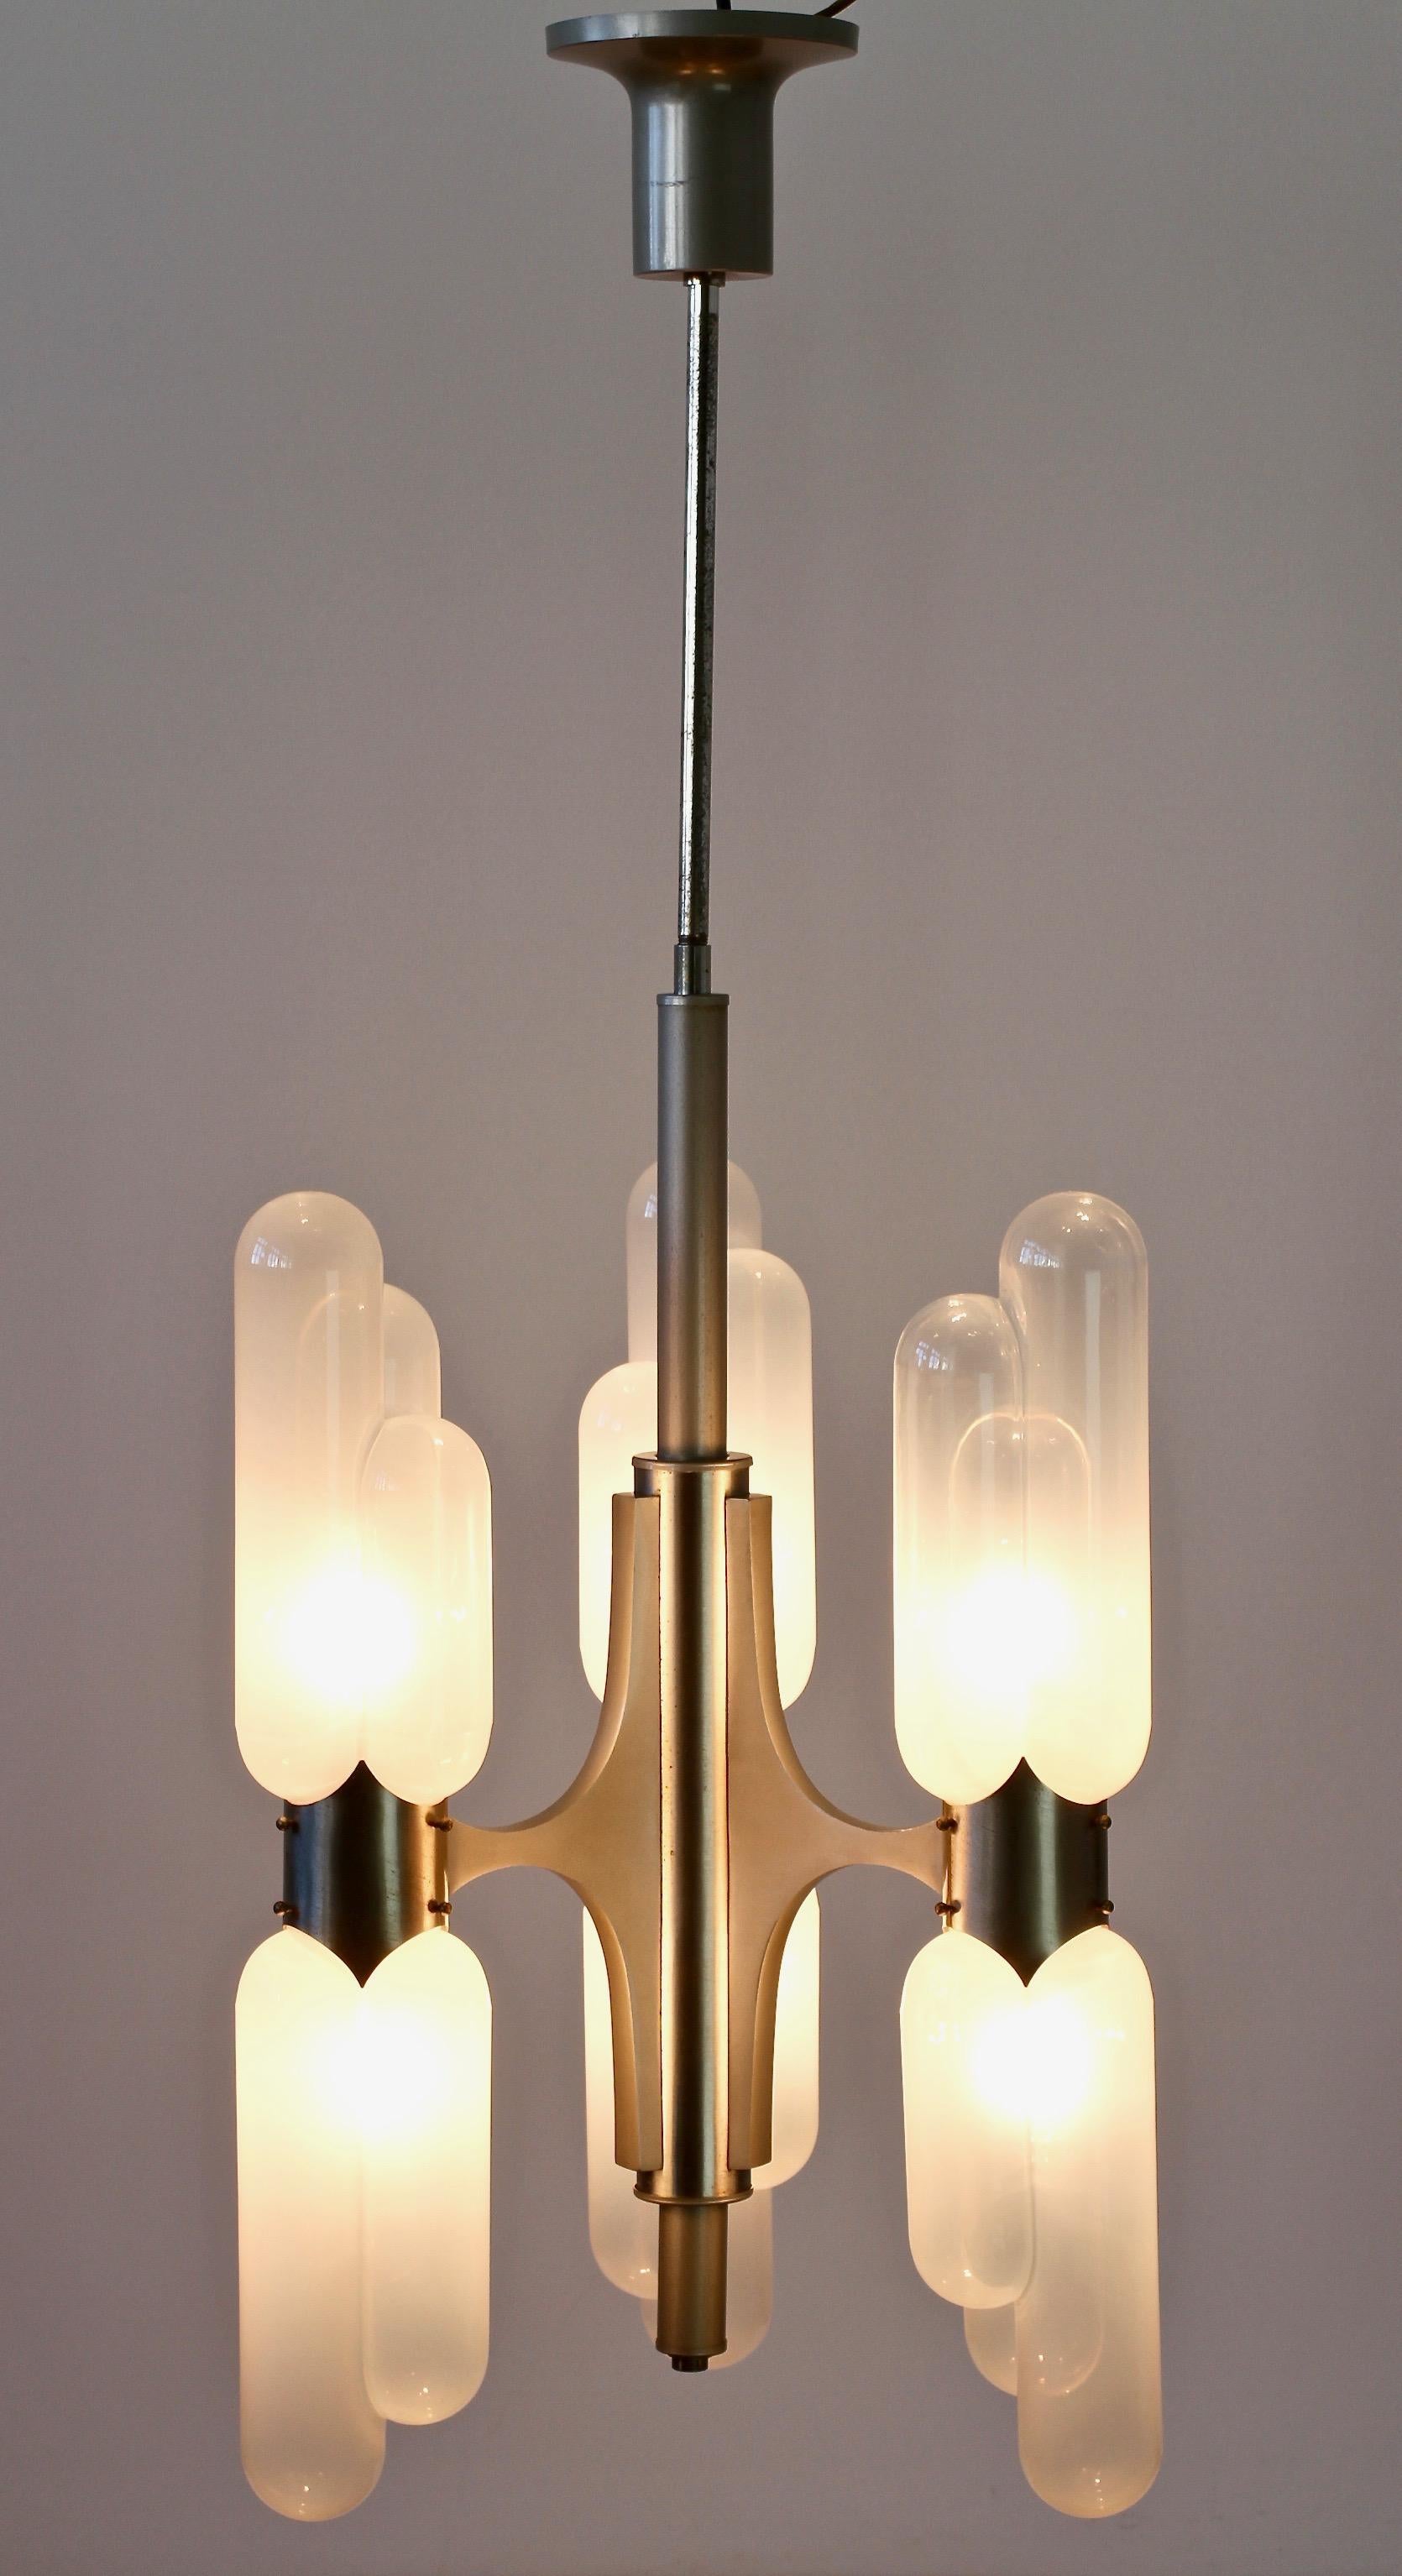 Futuristic vintage midcentury Murano glass  'Torpedo' chandelier or pendant light fixture designed by Carlo Nason and manufactured by Mazzega in the late 1960s-early 1970s. Beautiful design lamp featuring six handmade / mouth blown opaline glass